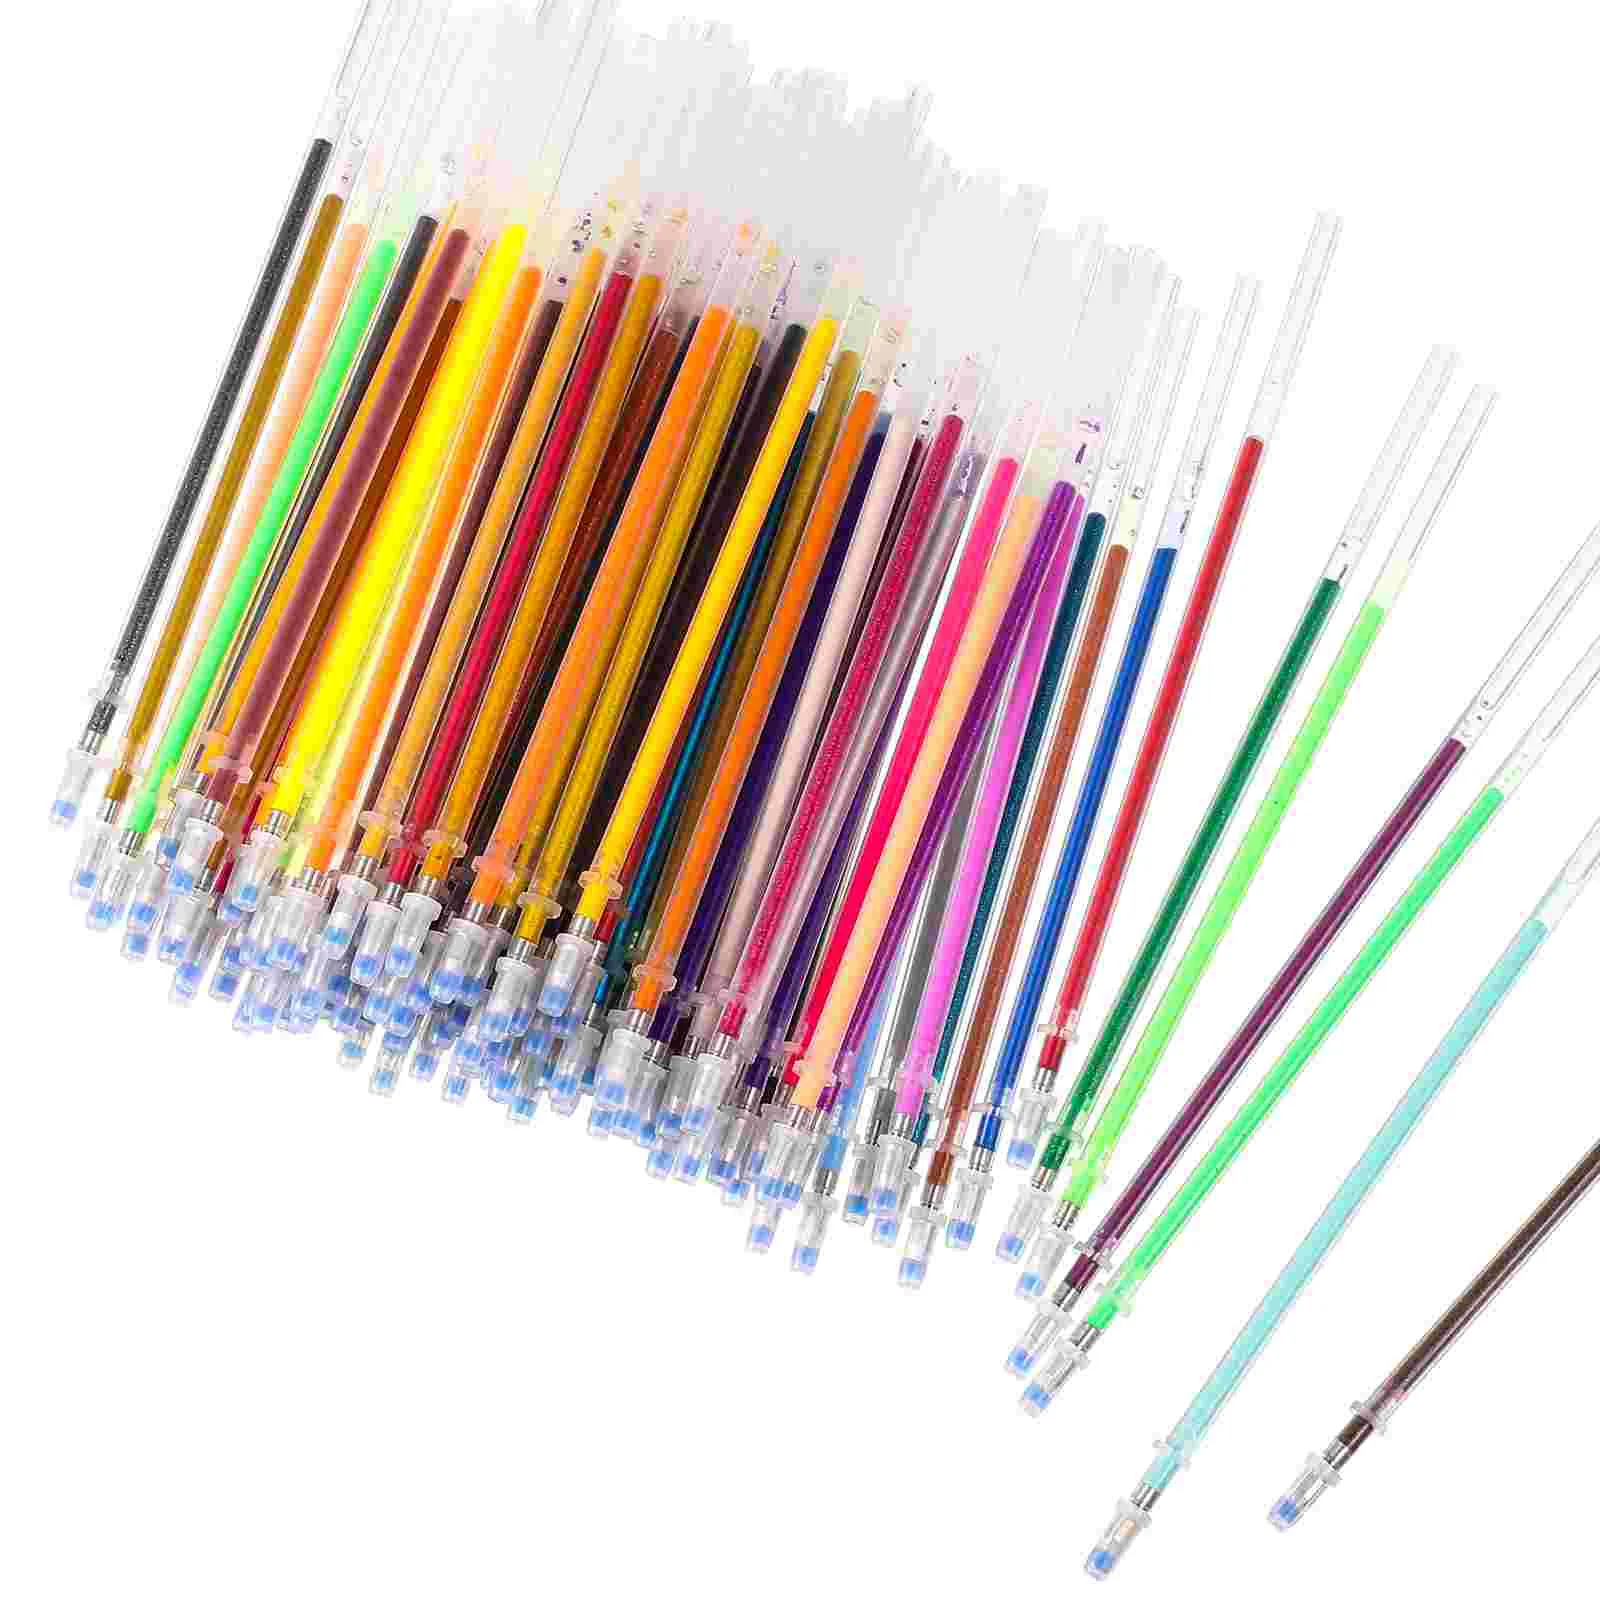 

TOYANDONA 100pcs Colorful Gel Pen Refills Bullet Pen Refill Student Stationery Office Supplies for Doodling Drawing (Mixed